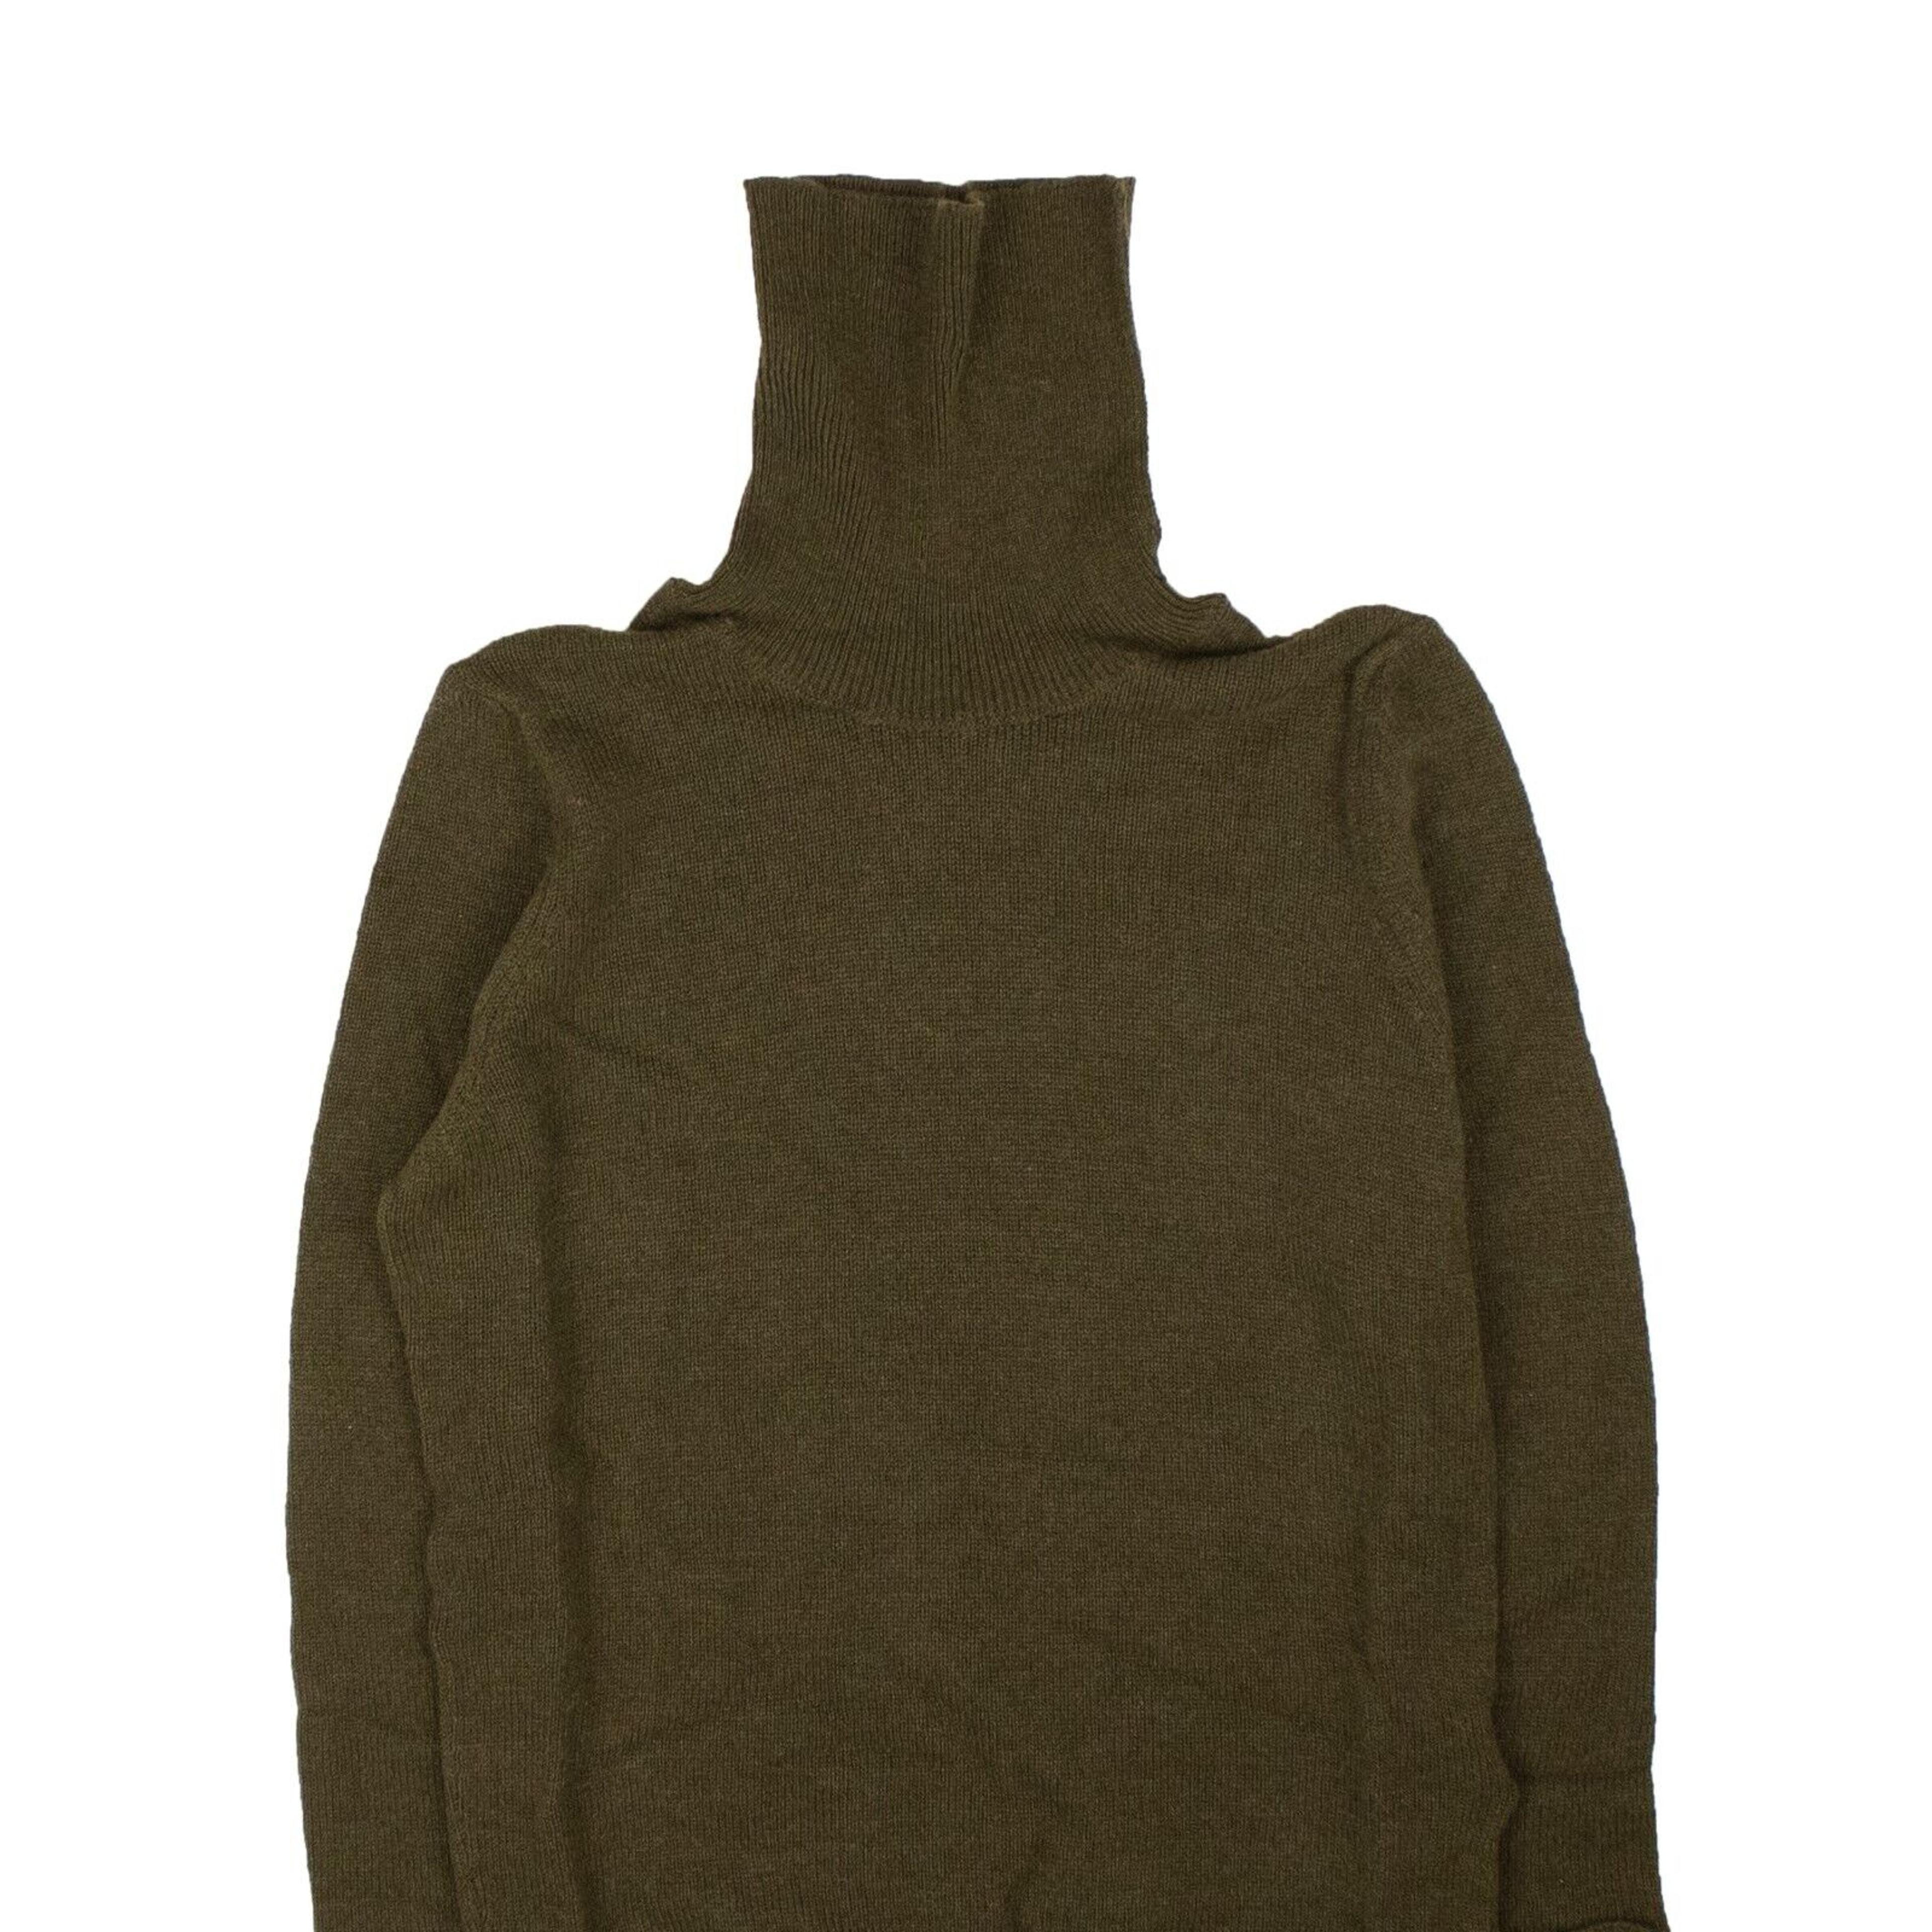 Alternate View 1 of Olive Green Distressed Cashmere Crewneck